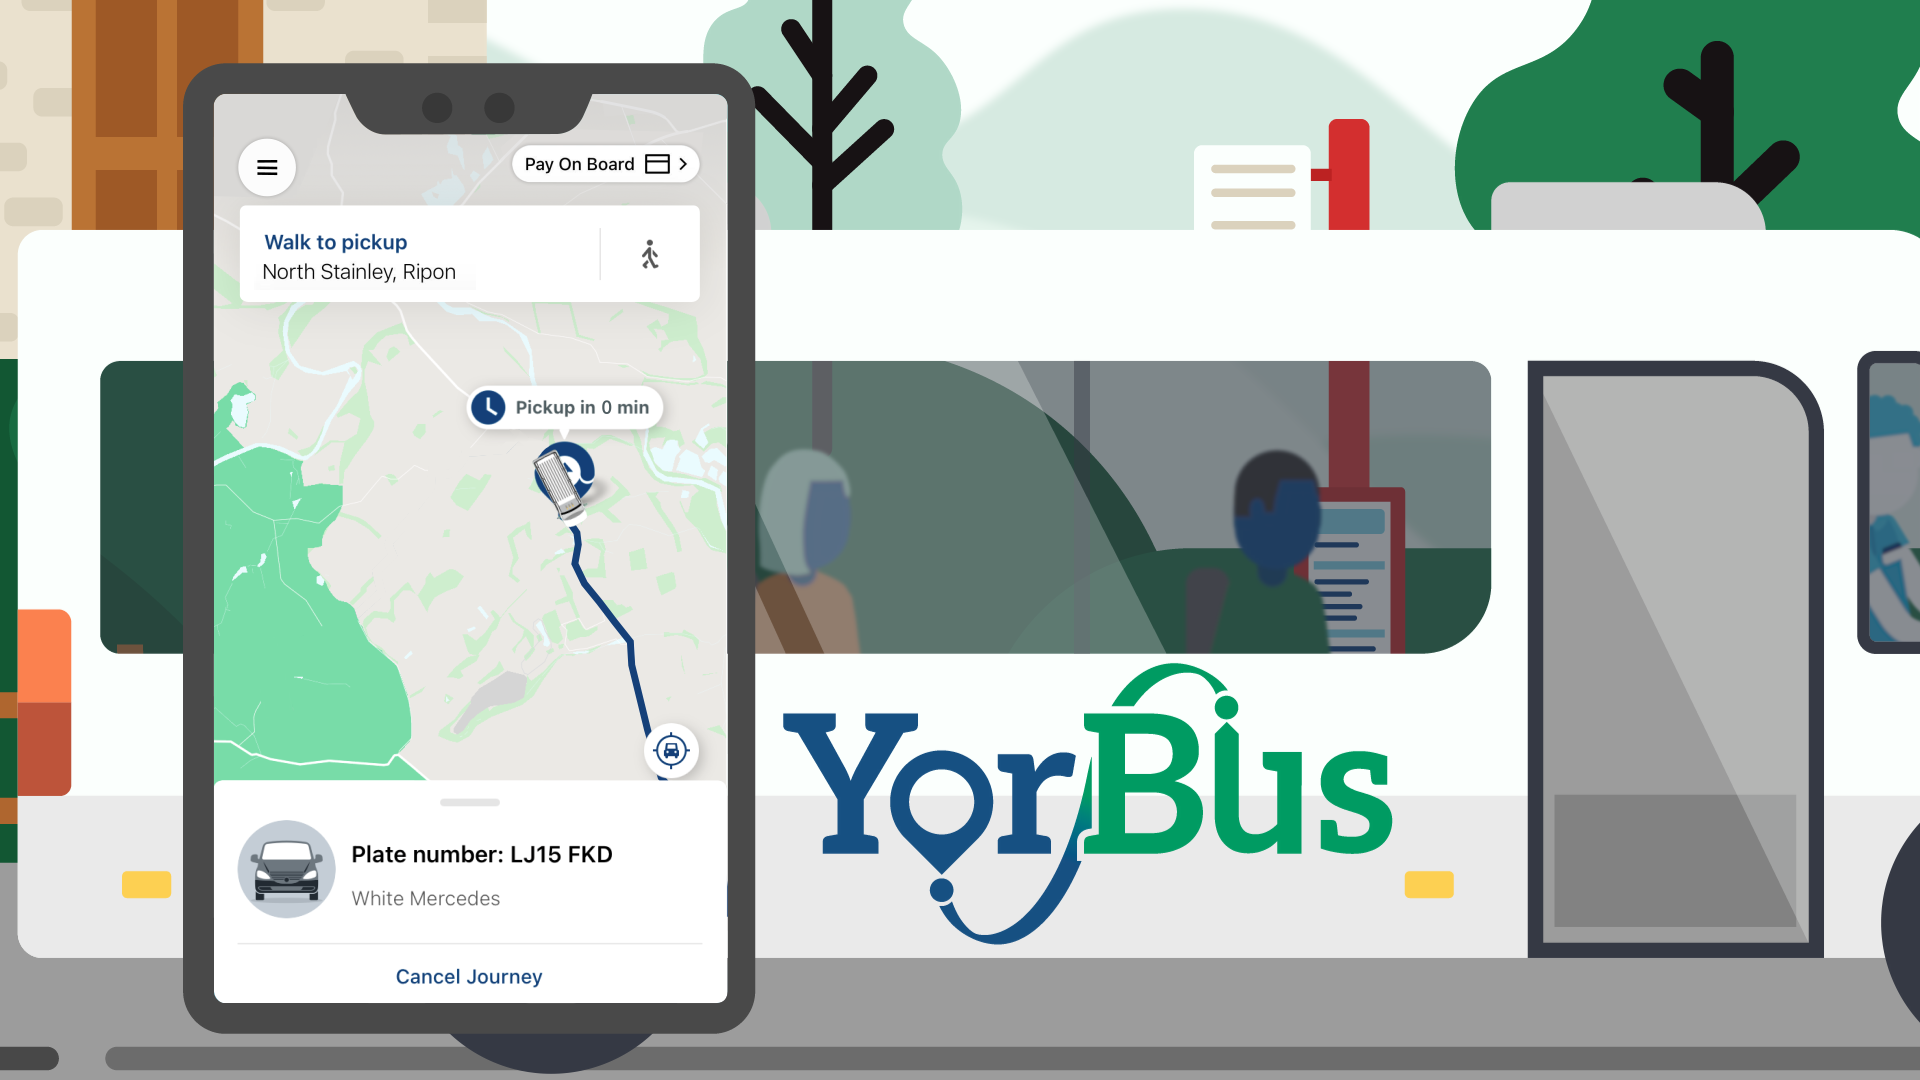 An image from the animation, showing the app for YorBus services running on a mobile device with a bus in the distance